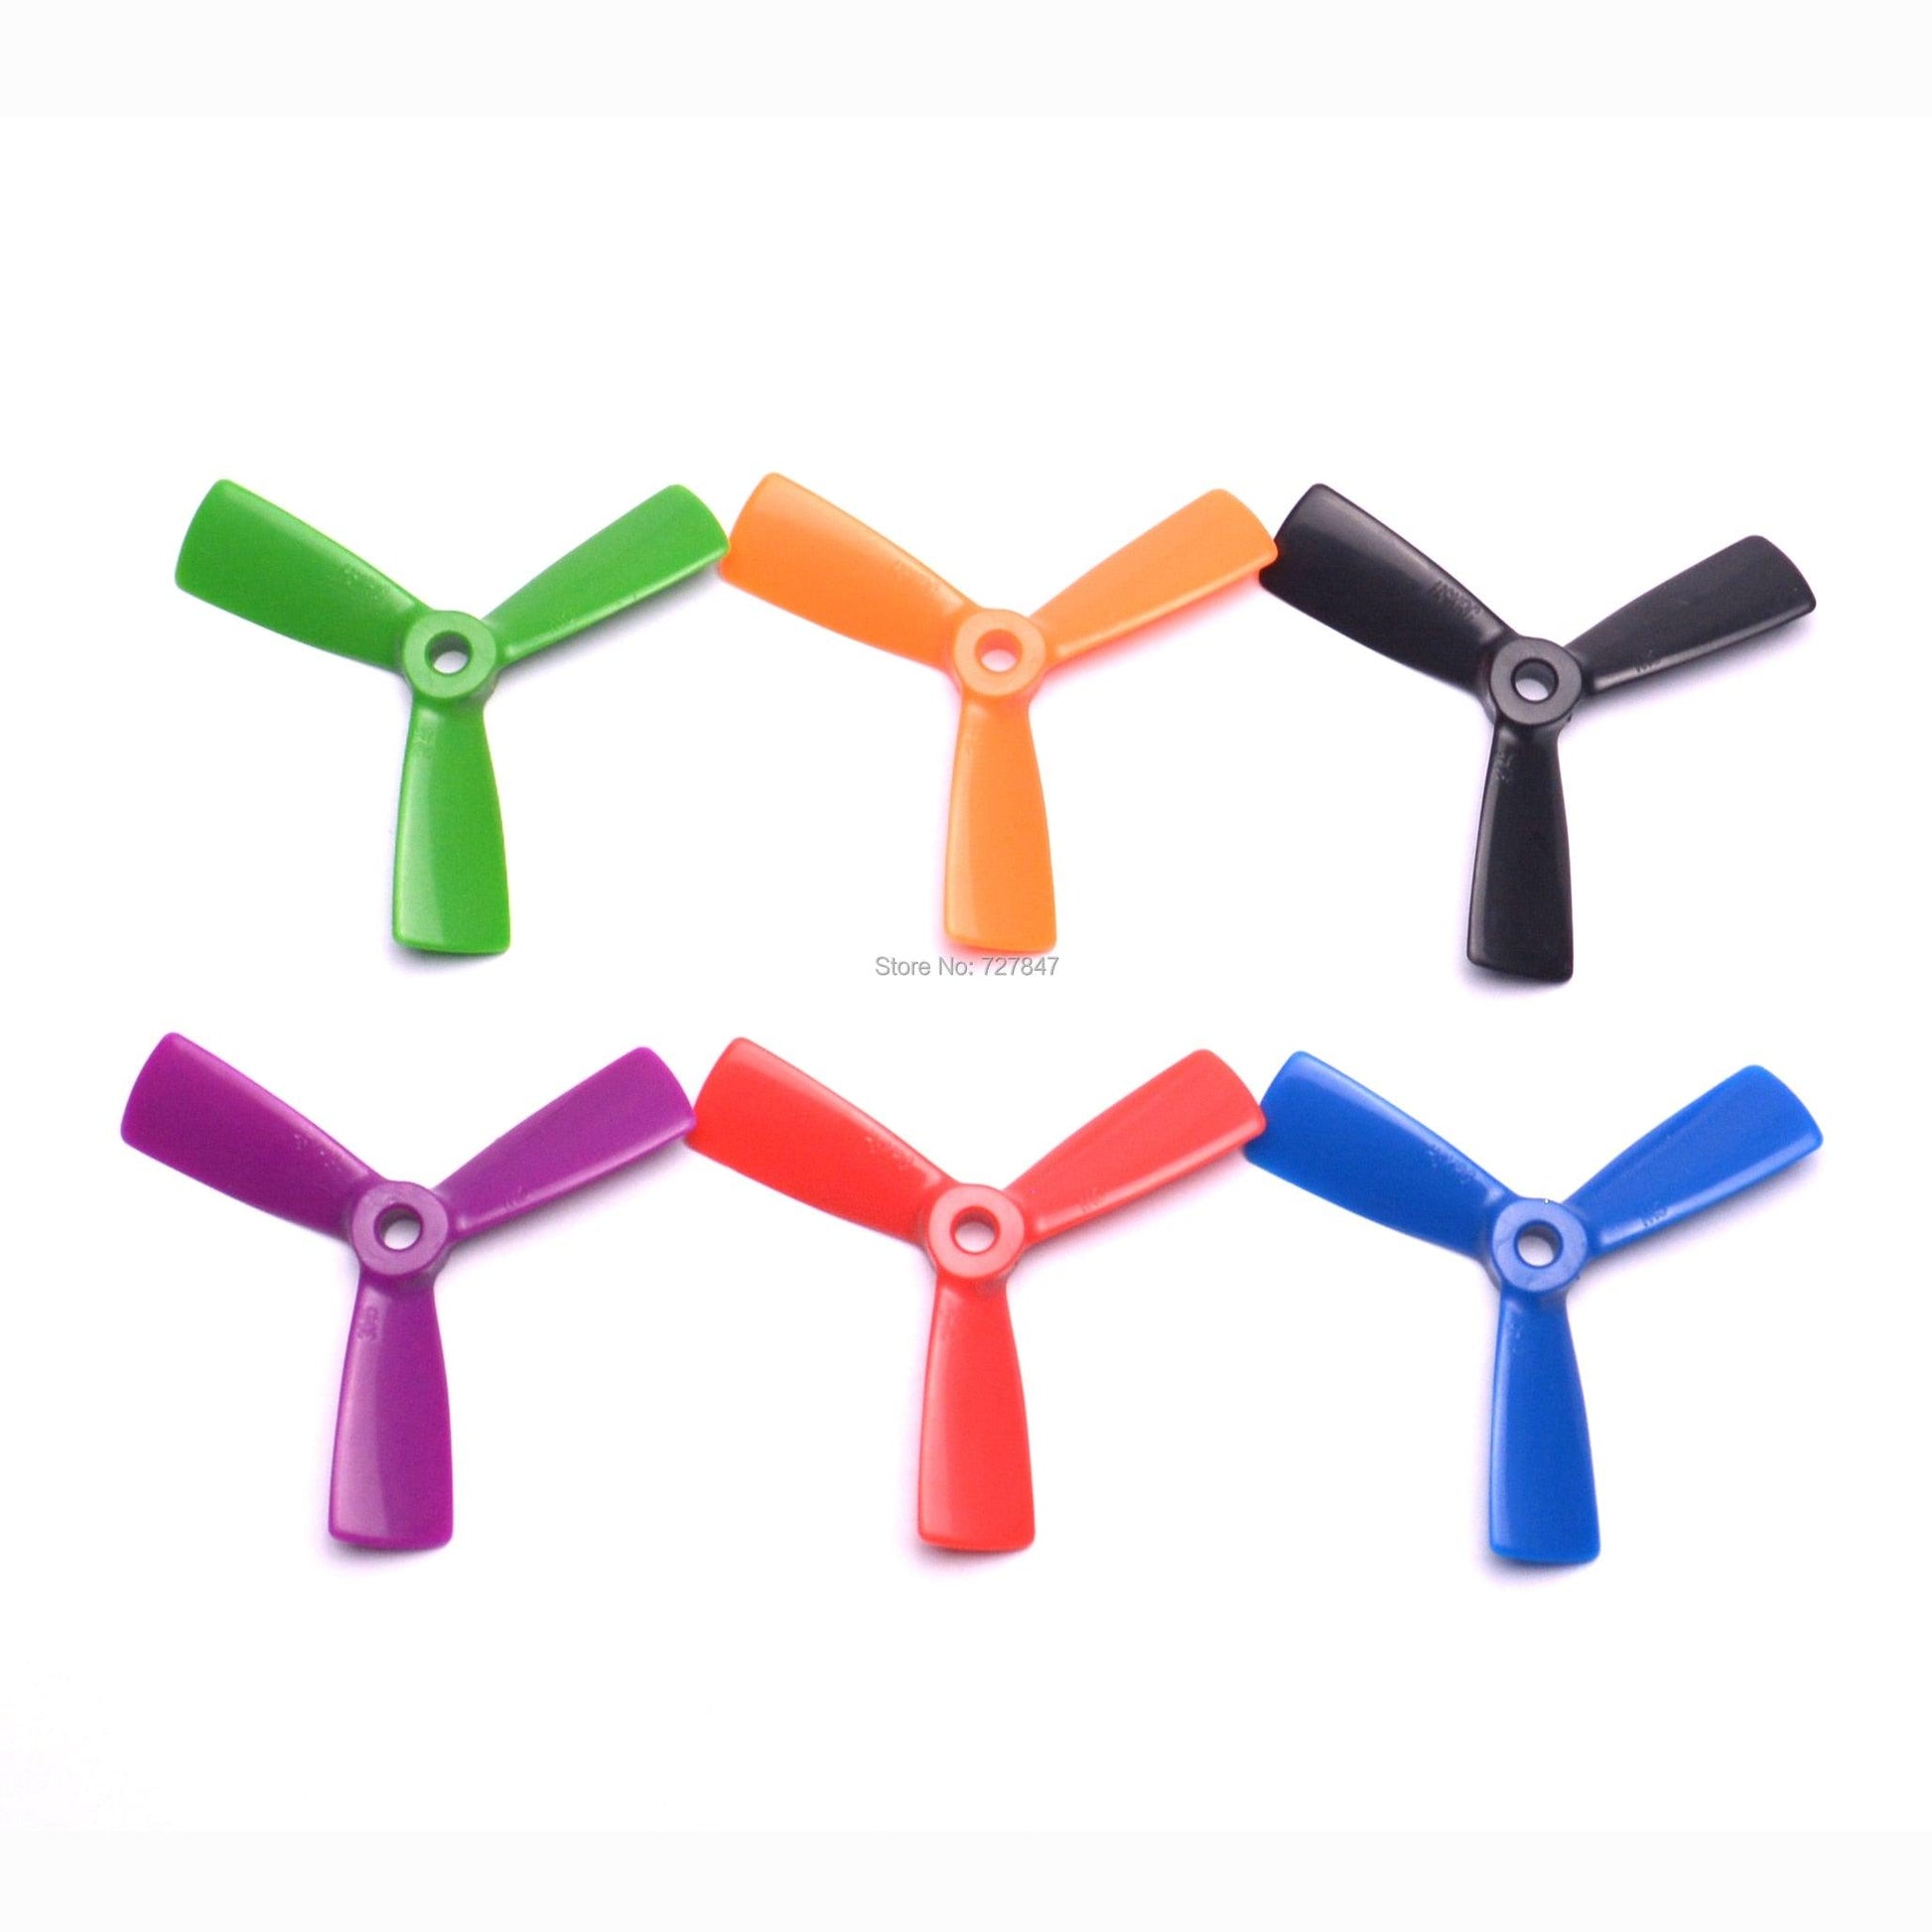 3045 3 blades Propeller - NEW 6 Pairs 3045 (6 color ) 3 blades Leaf Blade Prop Propeller CW /CCW for FPV Mini 130mm Quadcopter ZMR210 QAV250 High quality - RCDrone